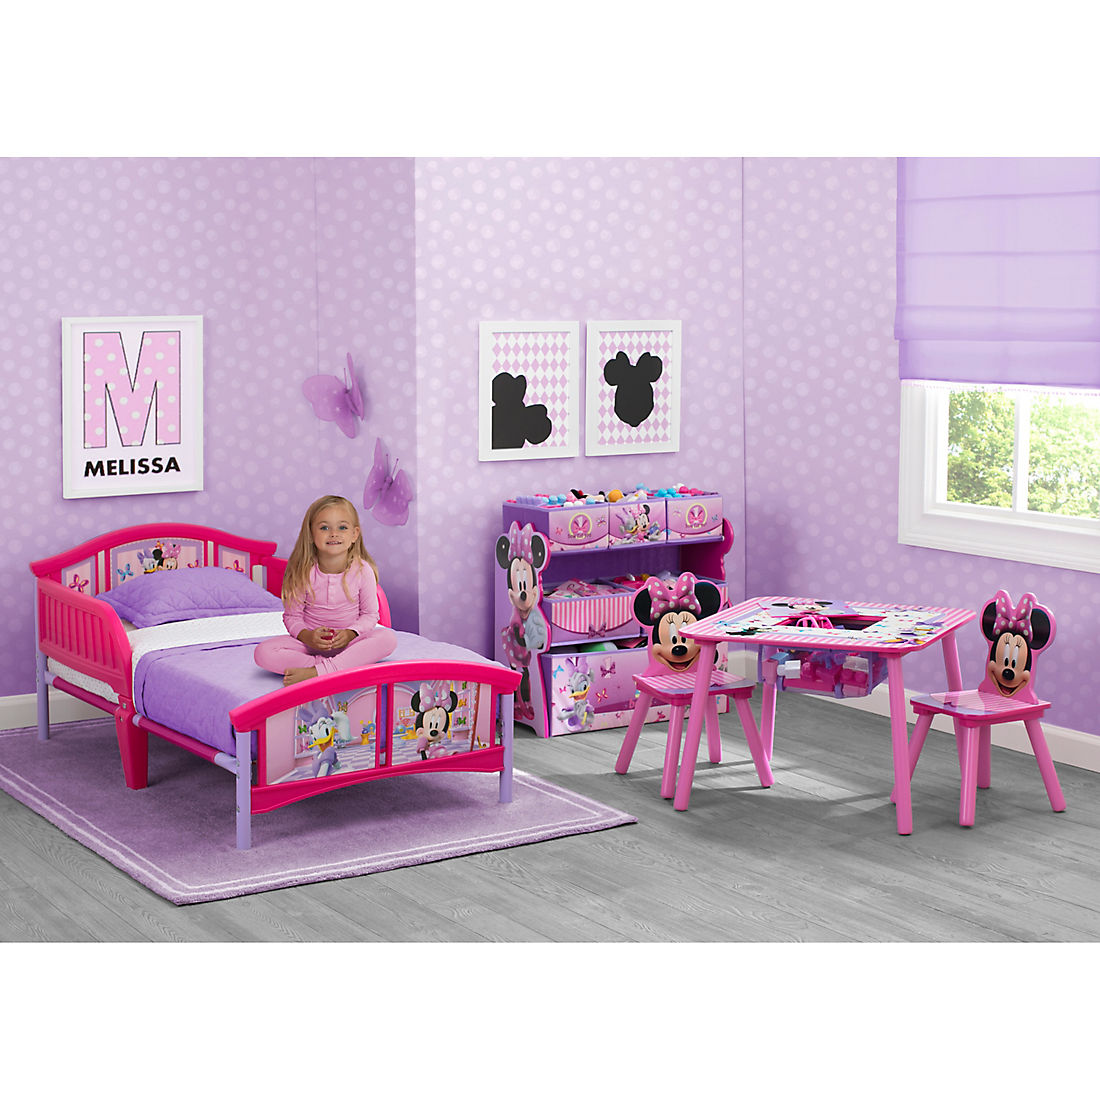 Disney Minnie Mouse Theme Wooden Toddler Bed Pink Girls Bedroom Decoration 